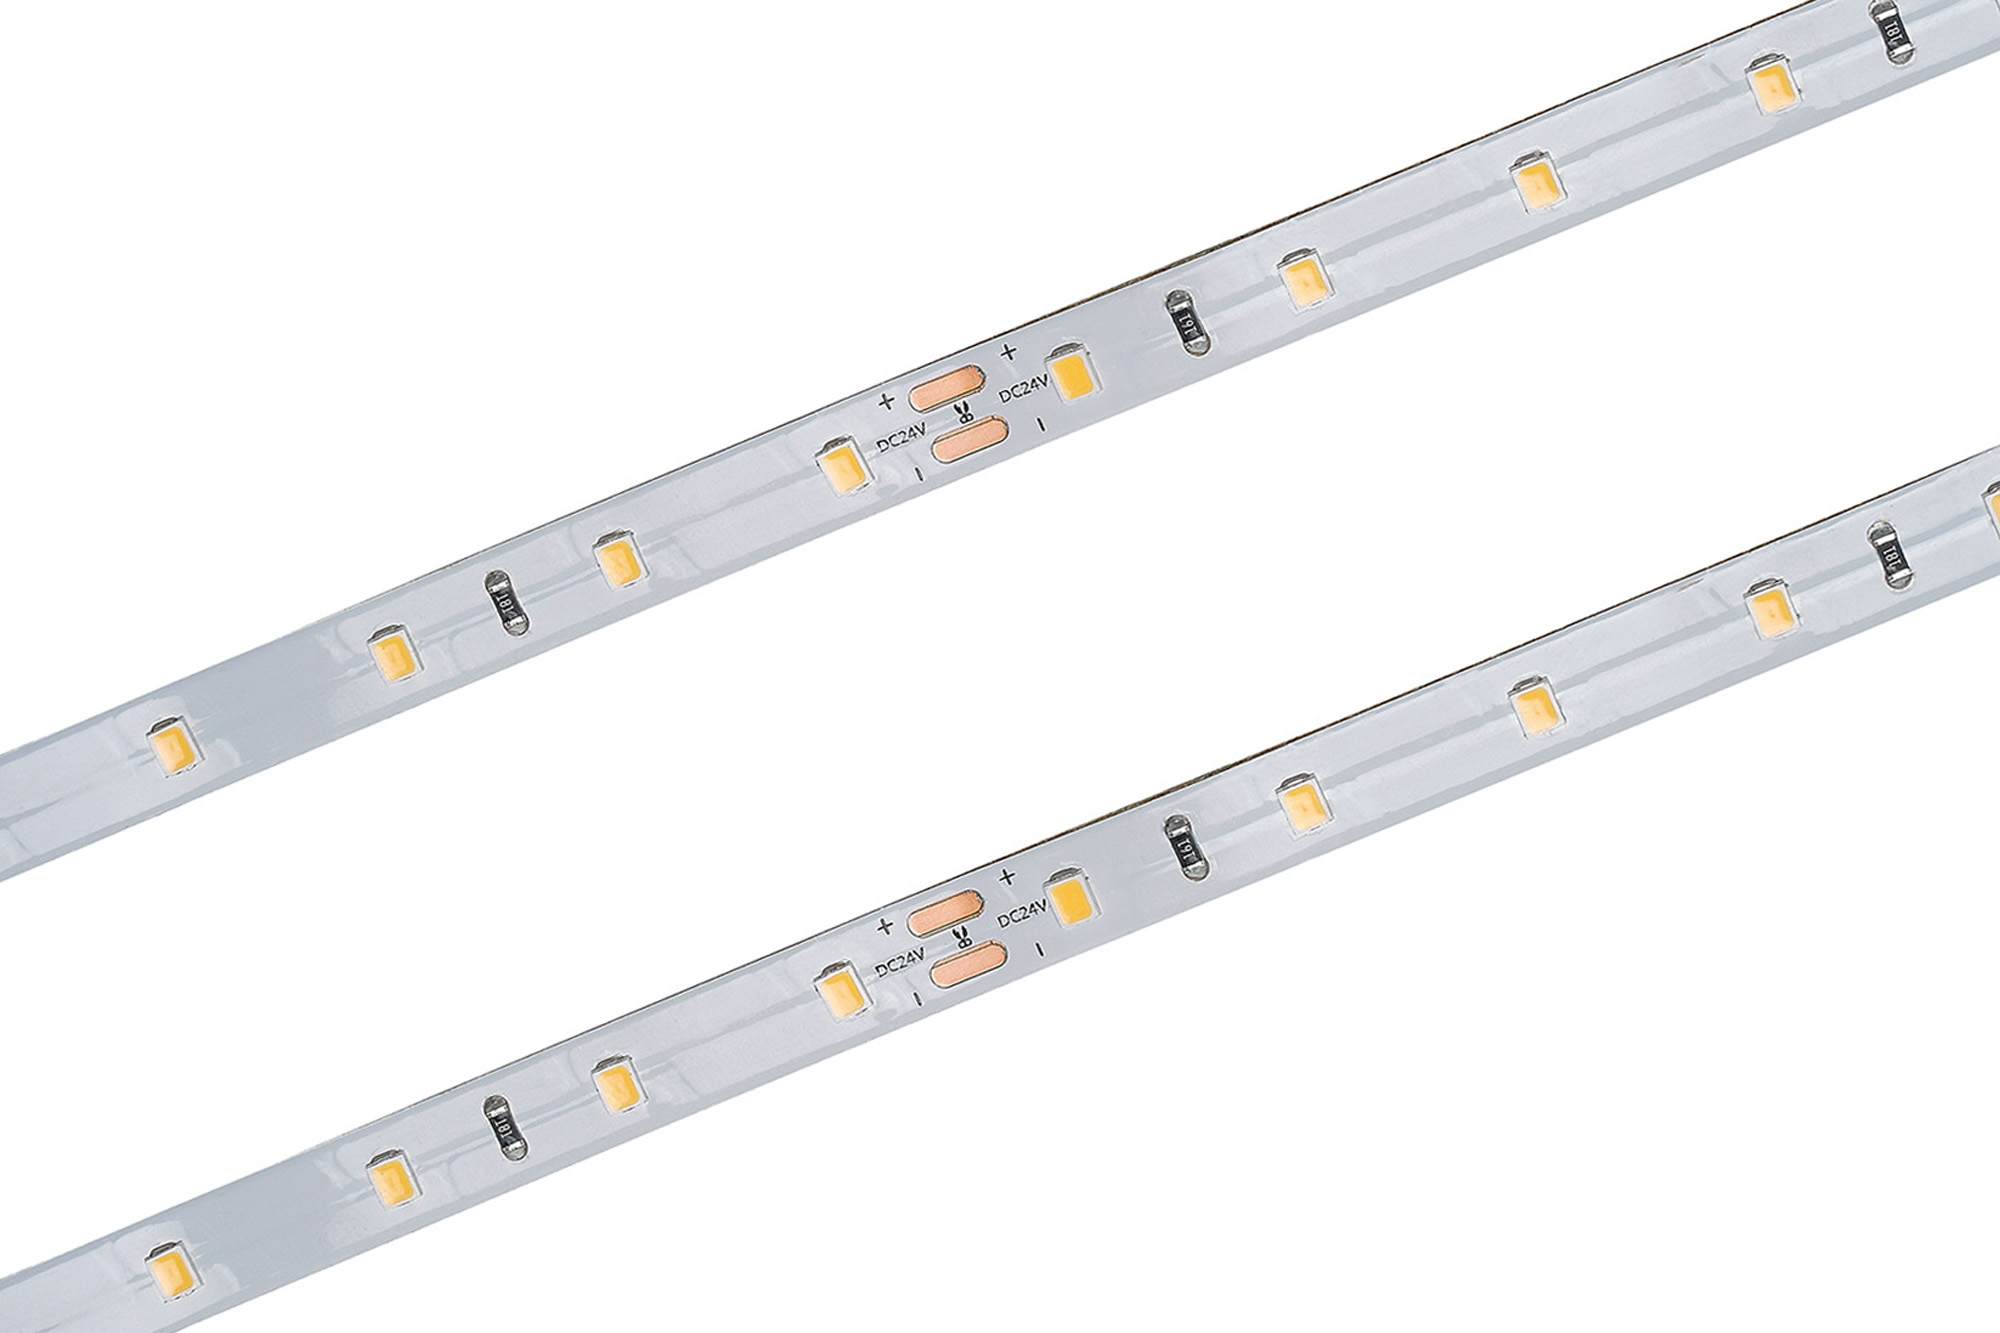 DX700115  Axios Select 5mx8mm 24V 24W LED Strip 380lm/m 3000K IP20